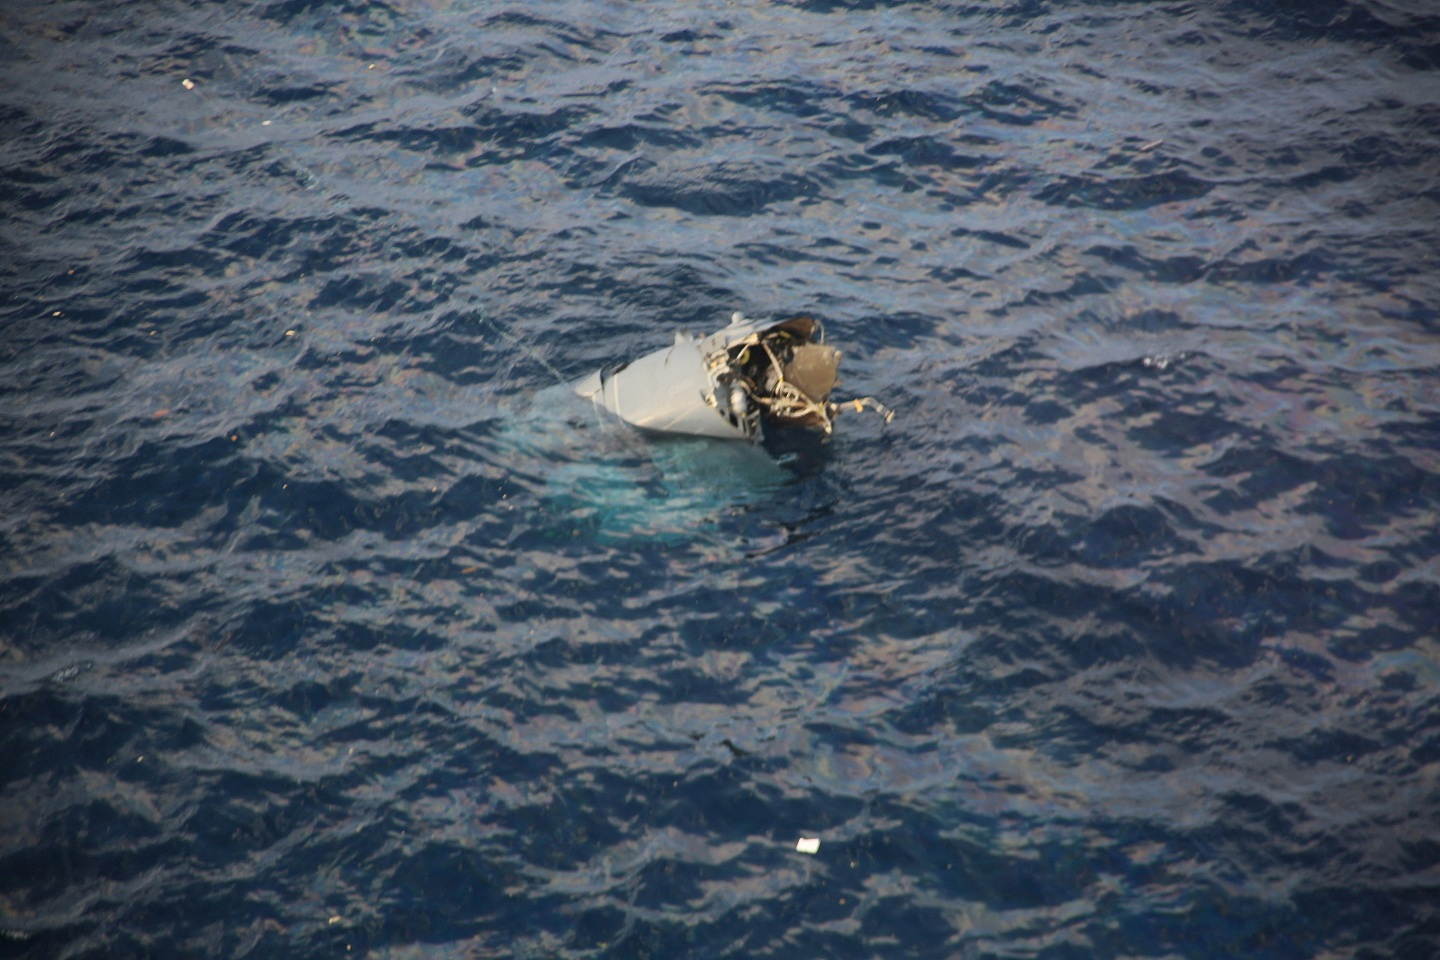 Handout photo shows a wreck believed to belong to the U.S. military aircraft MV-22 Osprey that crashed into the sea off Yakushima Island, Japan